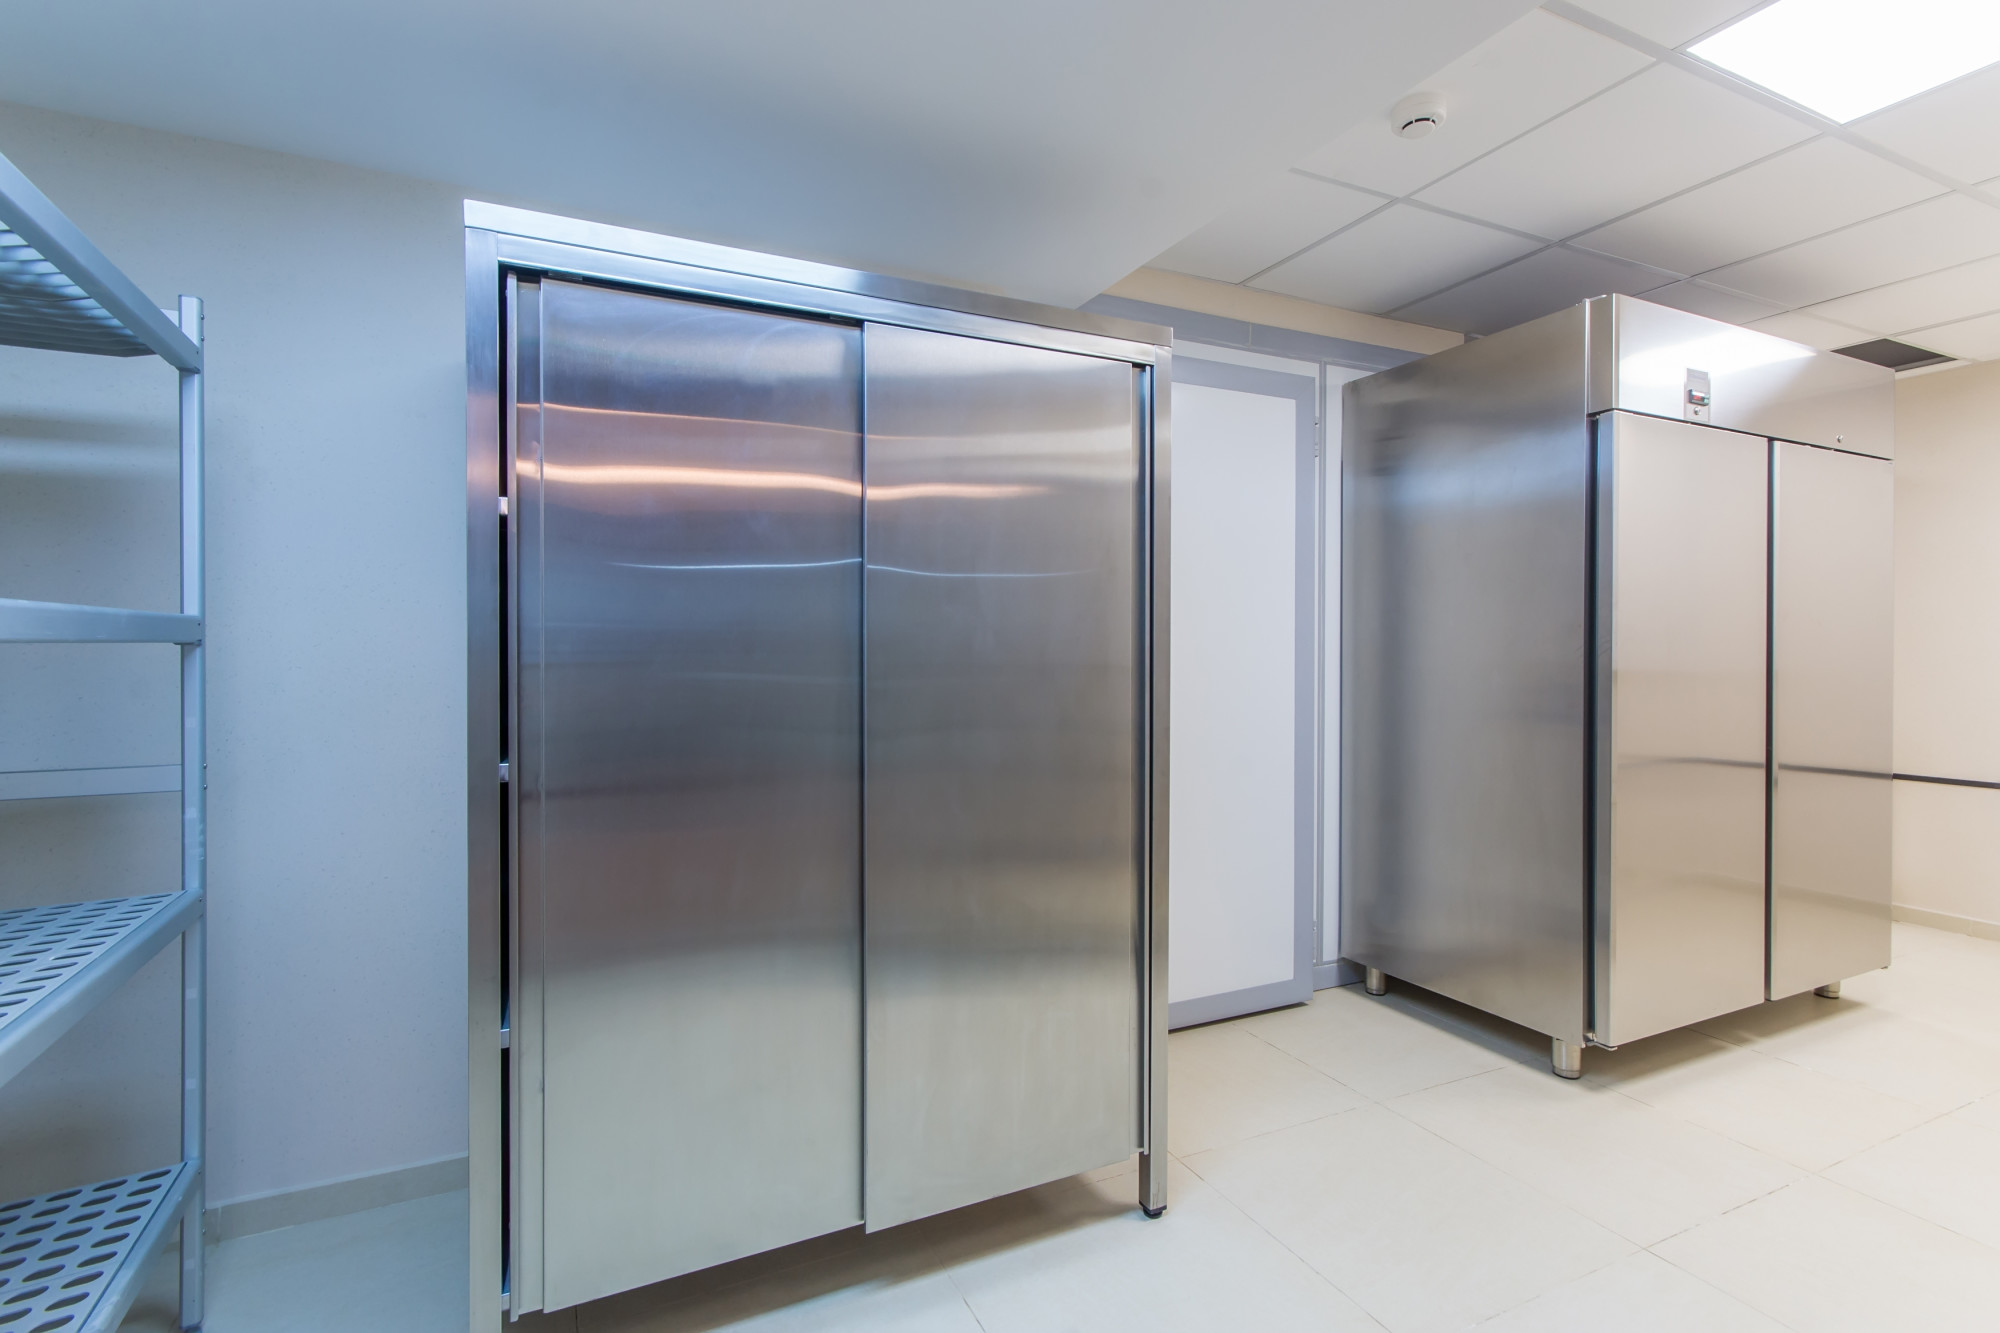 Everything You Need to Know About Using a Home Freeze Dryer for Your Cannabis Business